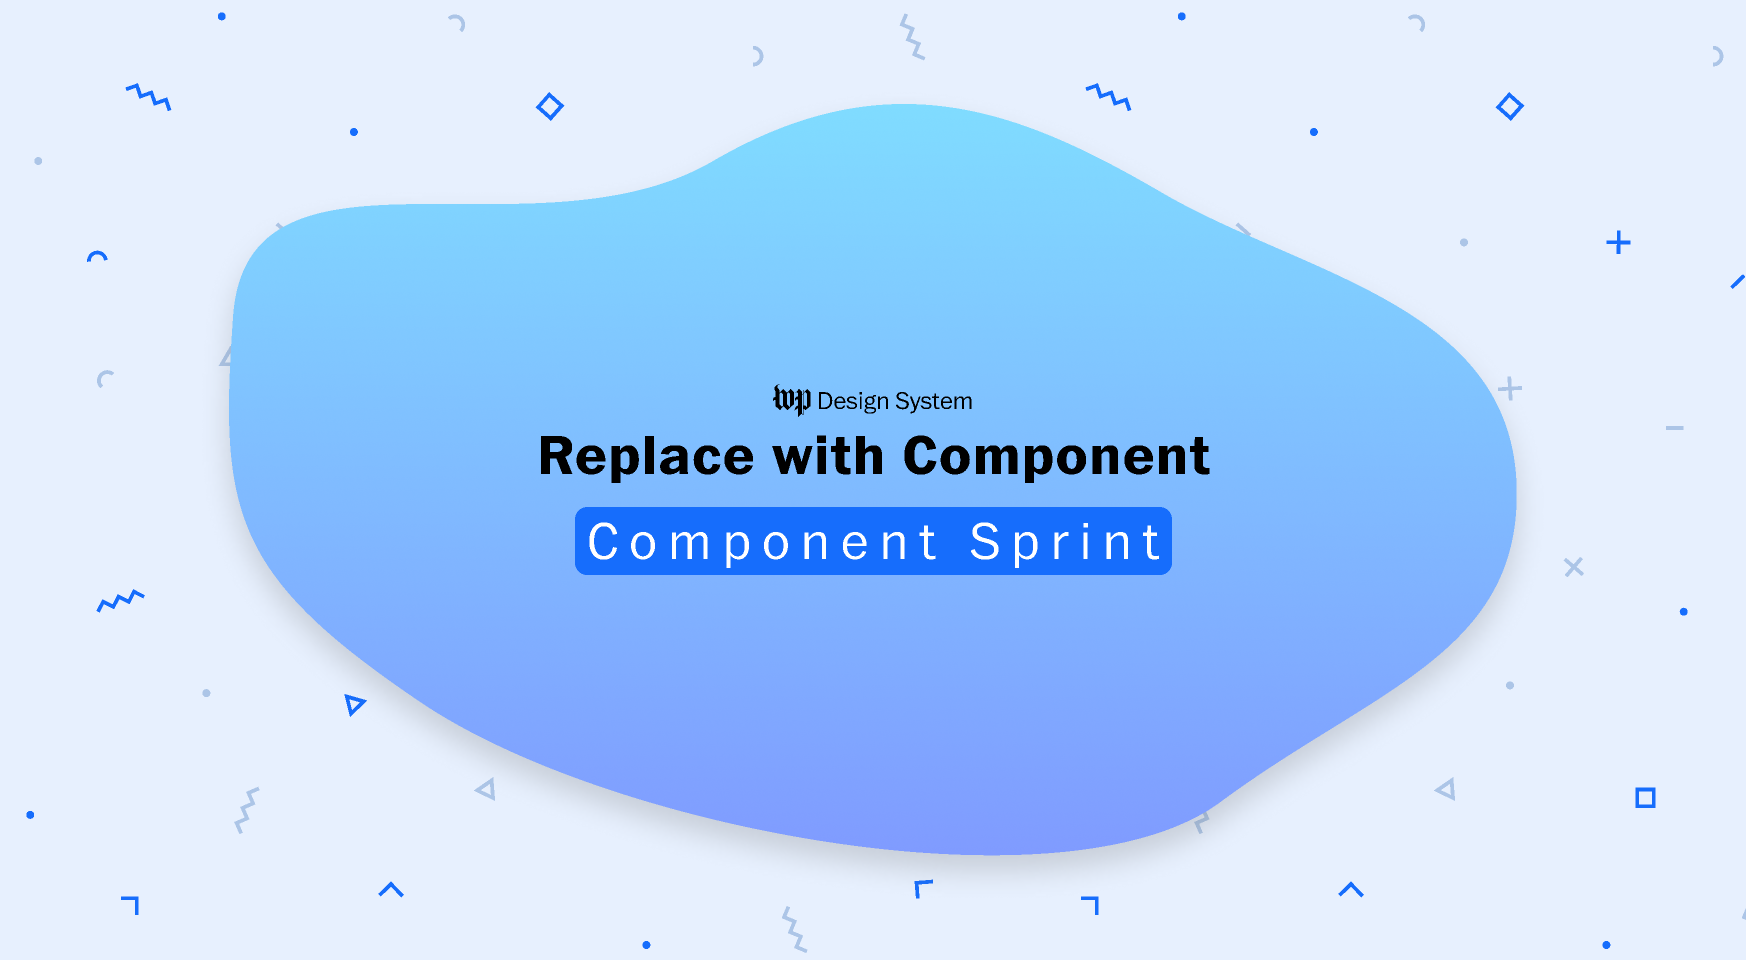 A blue gradient blob featues text that reads “Replace with Component: Component Sprint.” The background is light blue with scattered blue geometric shapes.